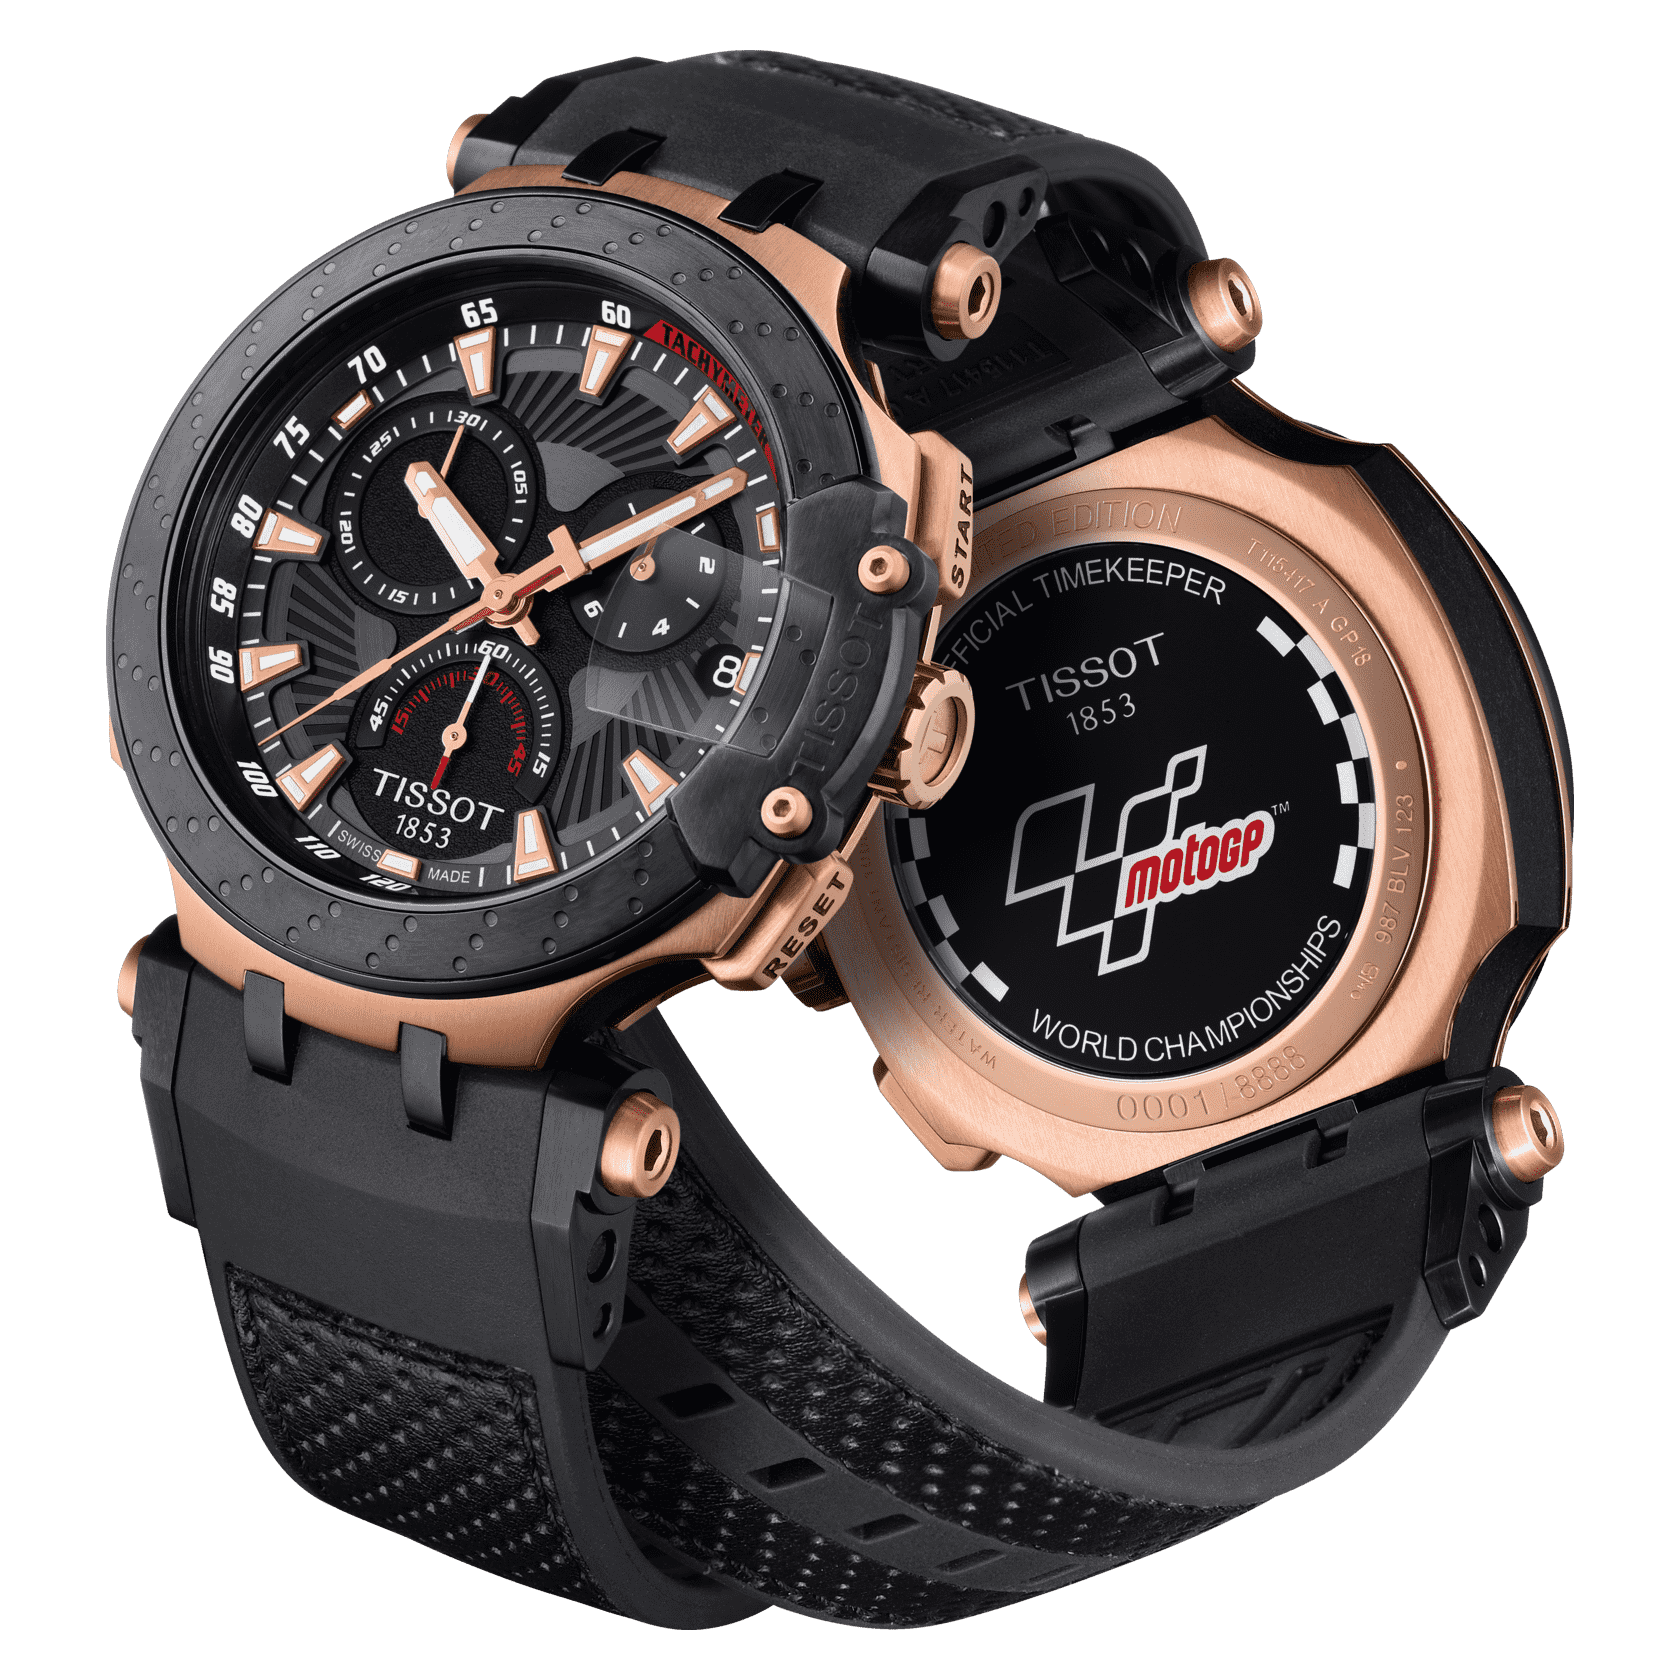 Perfect Replica Watches Reviews